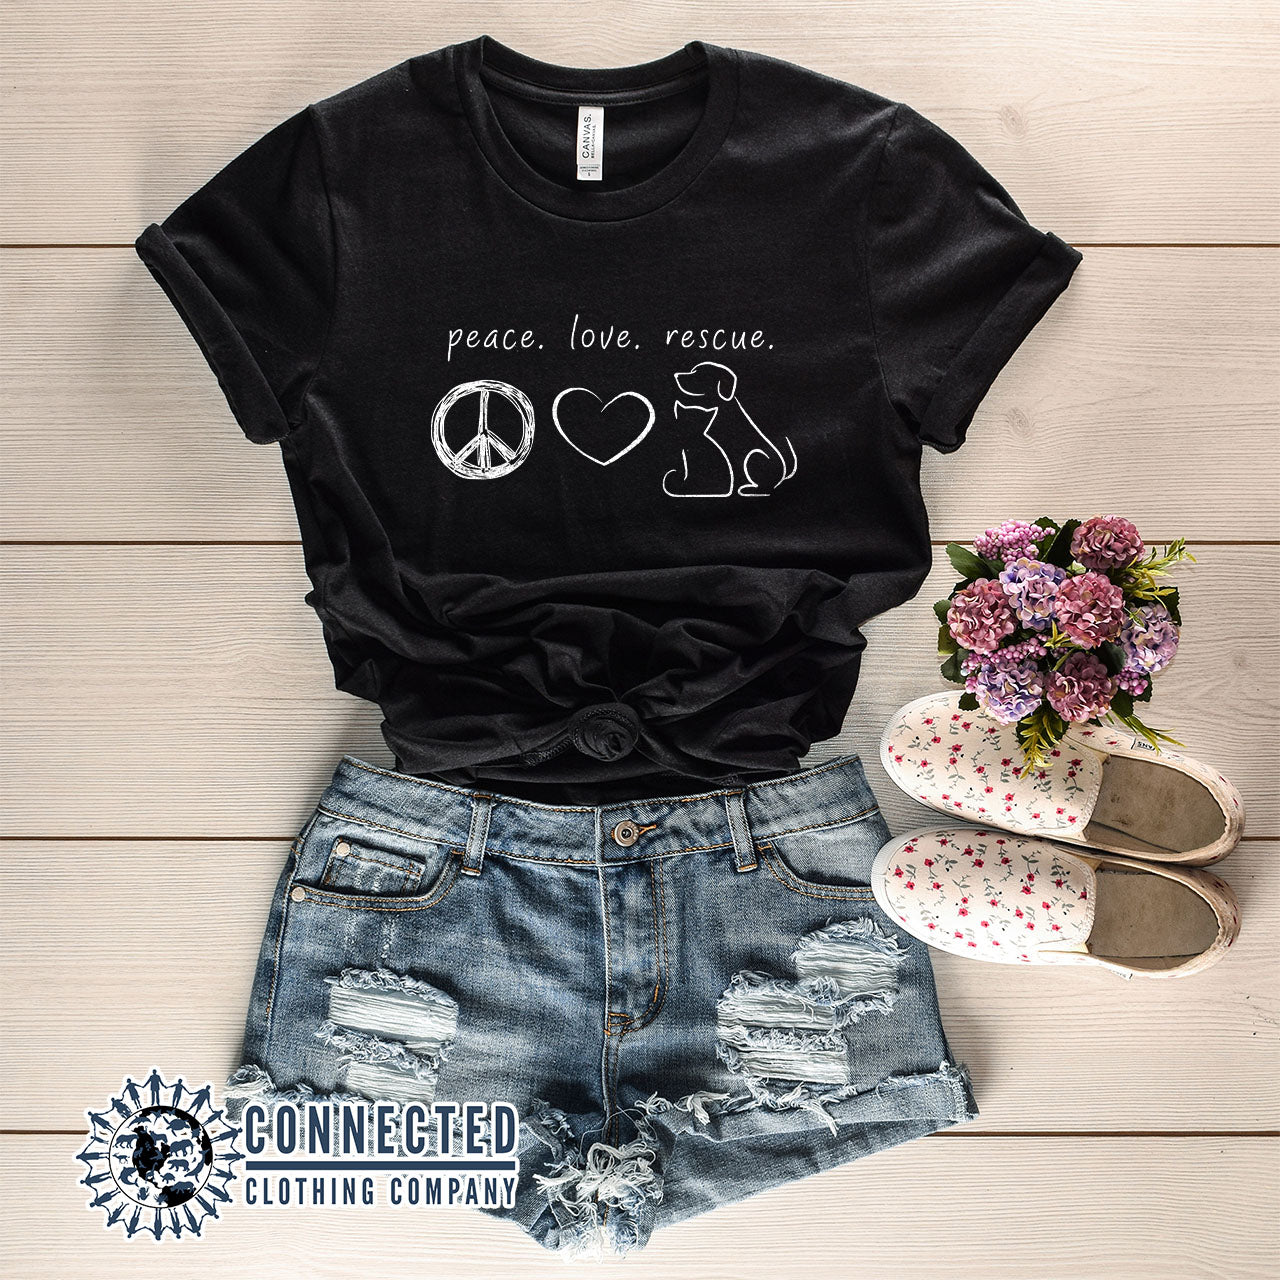 Black Peace Love Rescue Short-Sleeve Tee - Connected Clothing Company - Ethically and Sustainably Made - 10% donated to Villalobos Animal Rescue Center